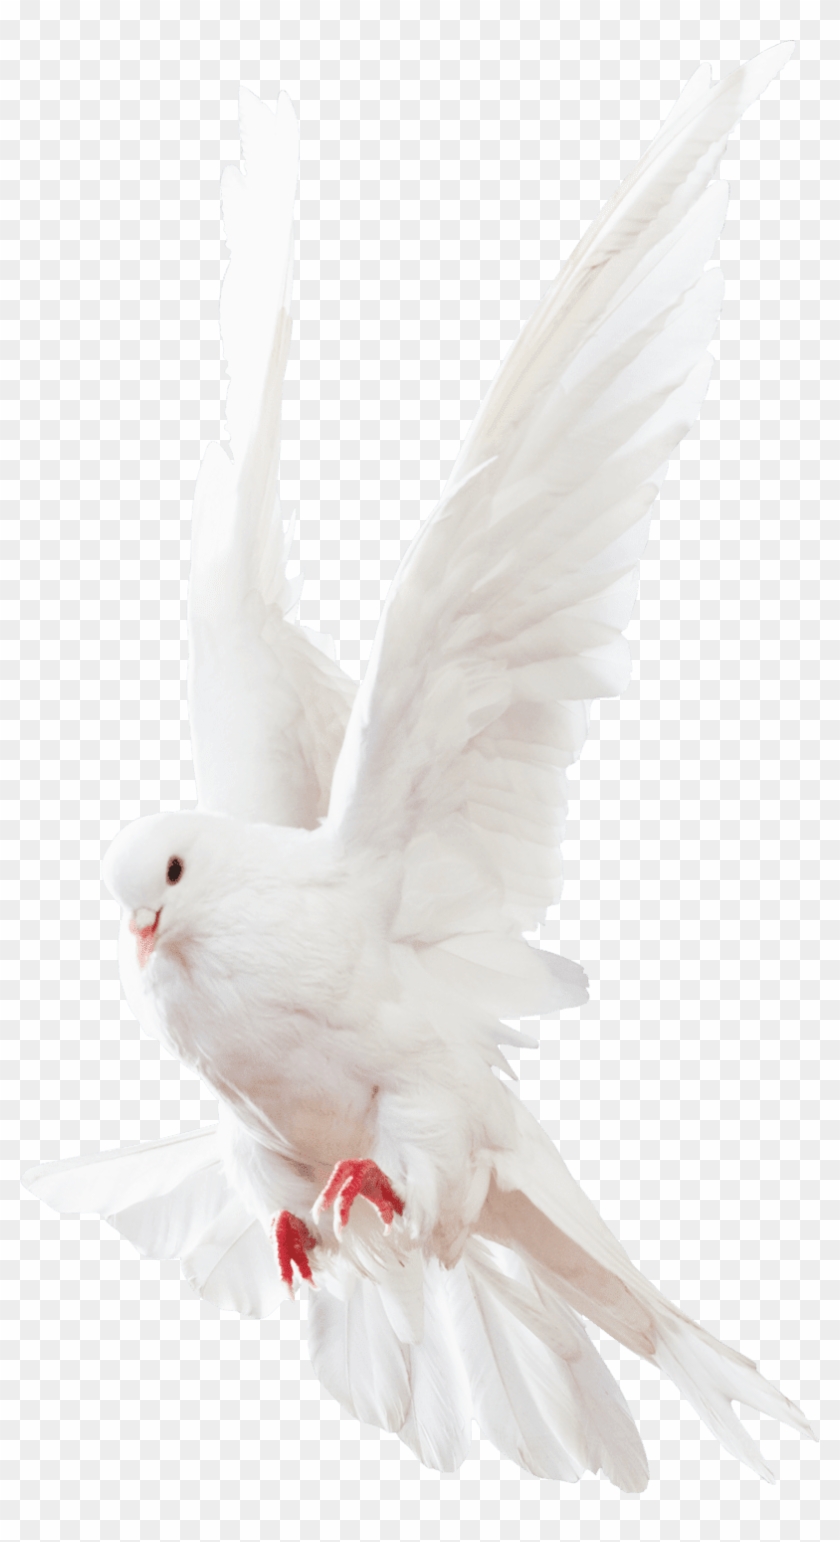 White Pigeon Images - Pigeons And Doves Clipart #209926